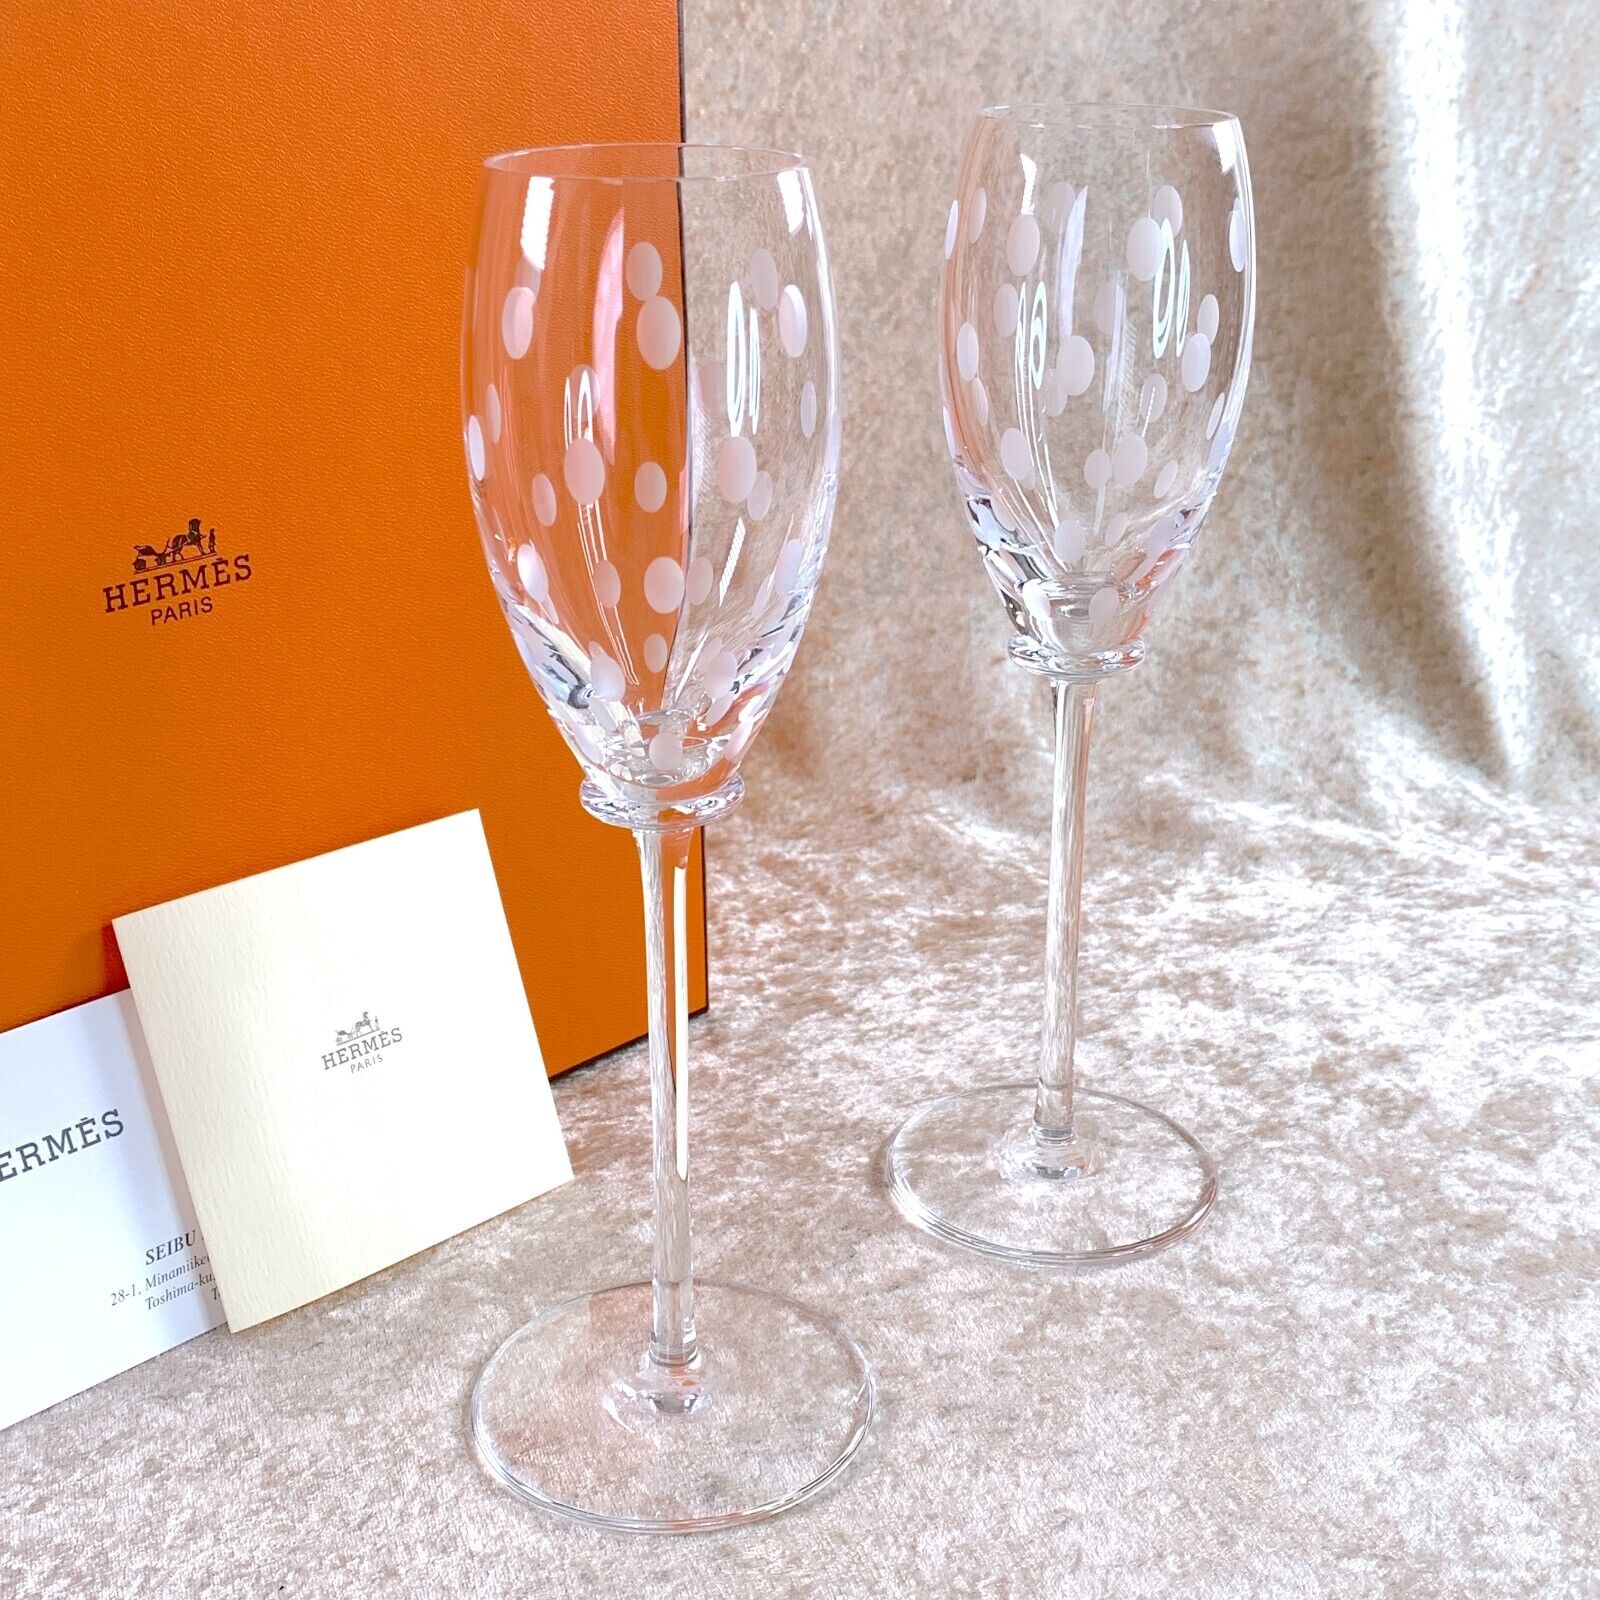 Authentic Hermes Paris Crystal Champagne Glasses Fanfare Set of 2 with Case